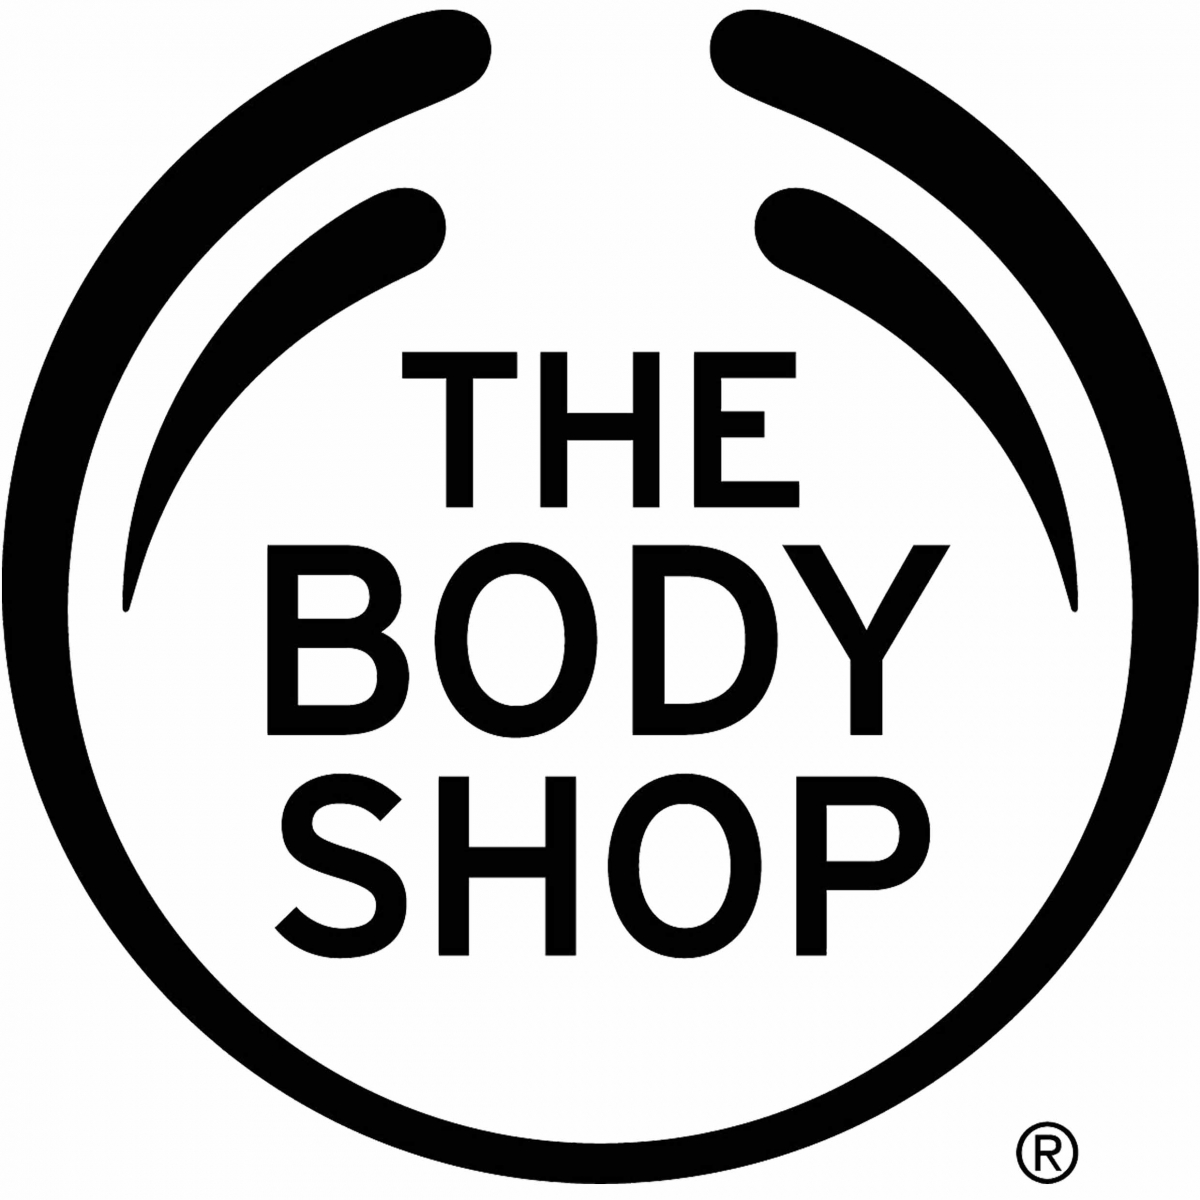 Thanks The Body Shop